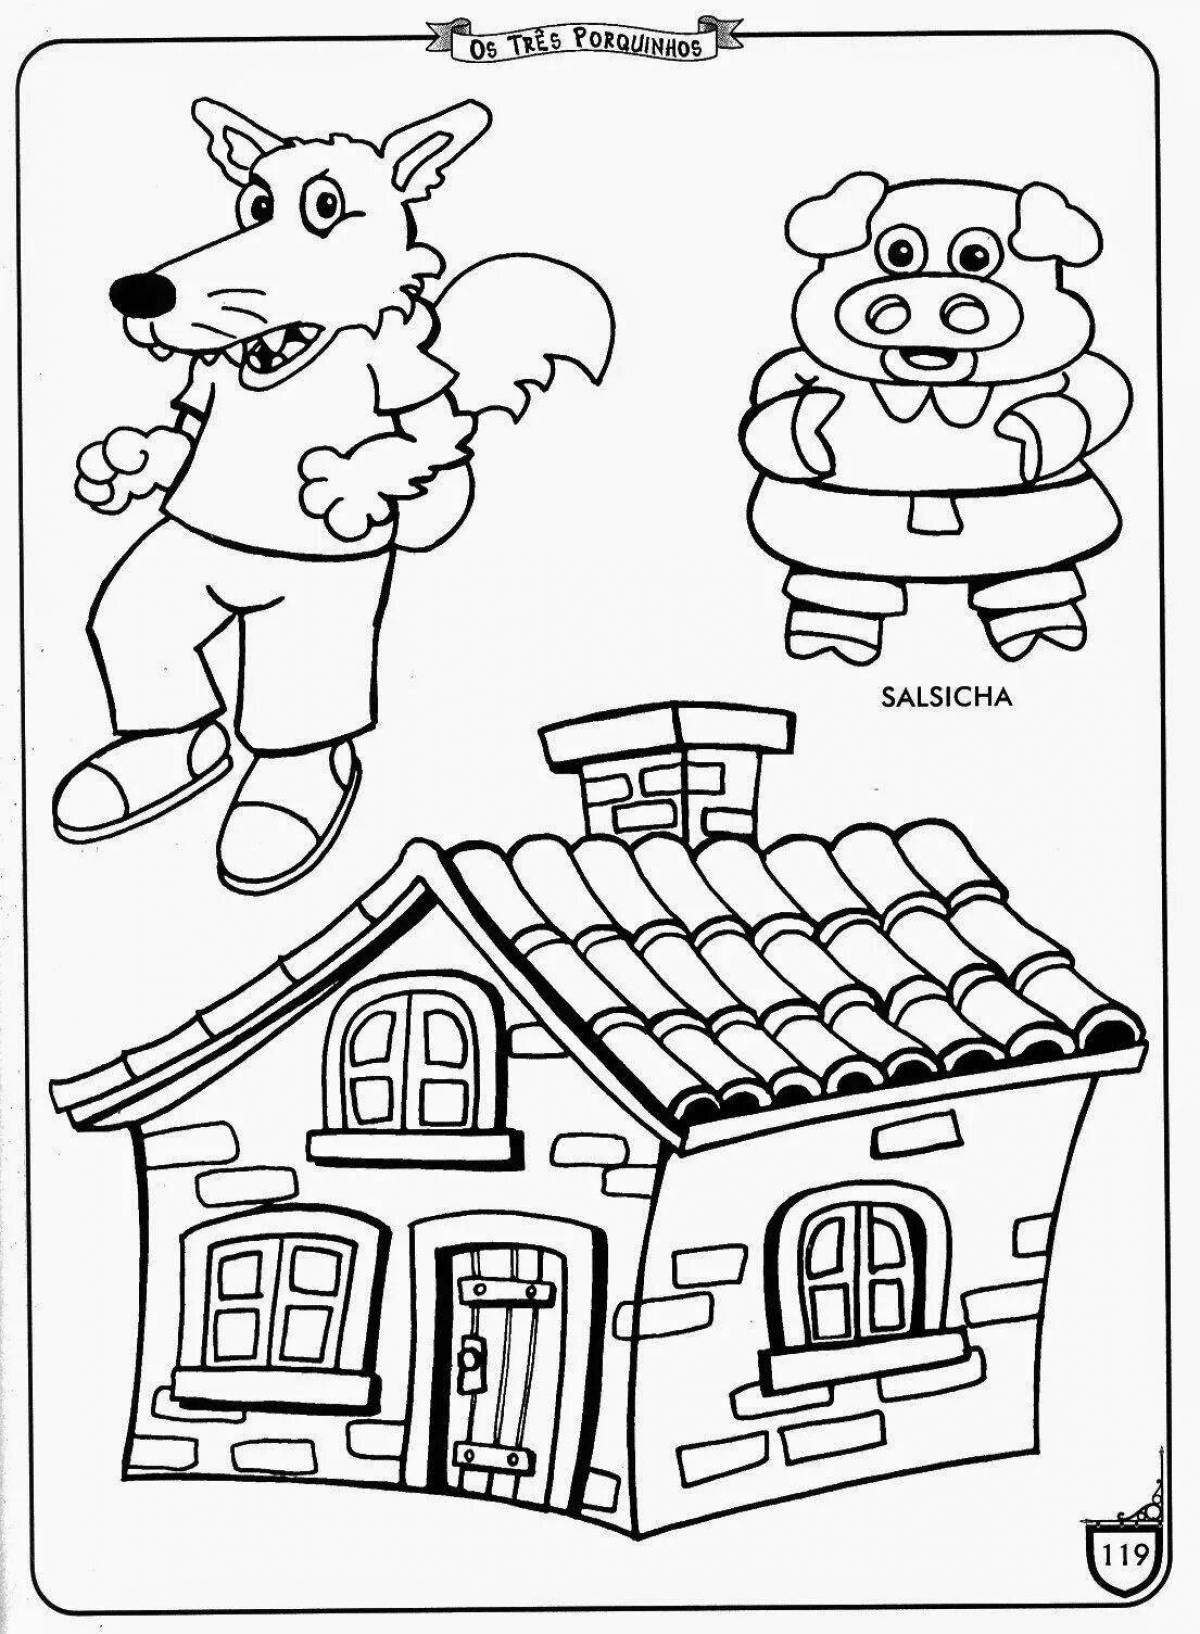 Festive three little pigs with houses